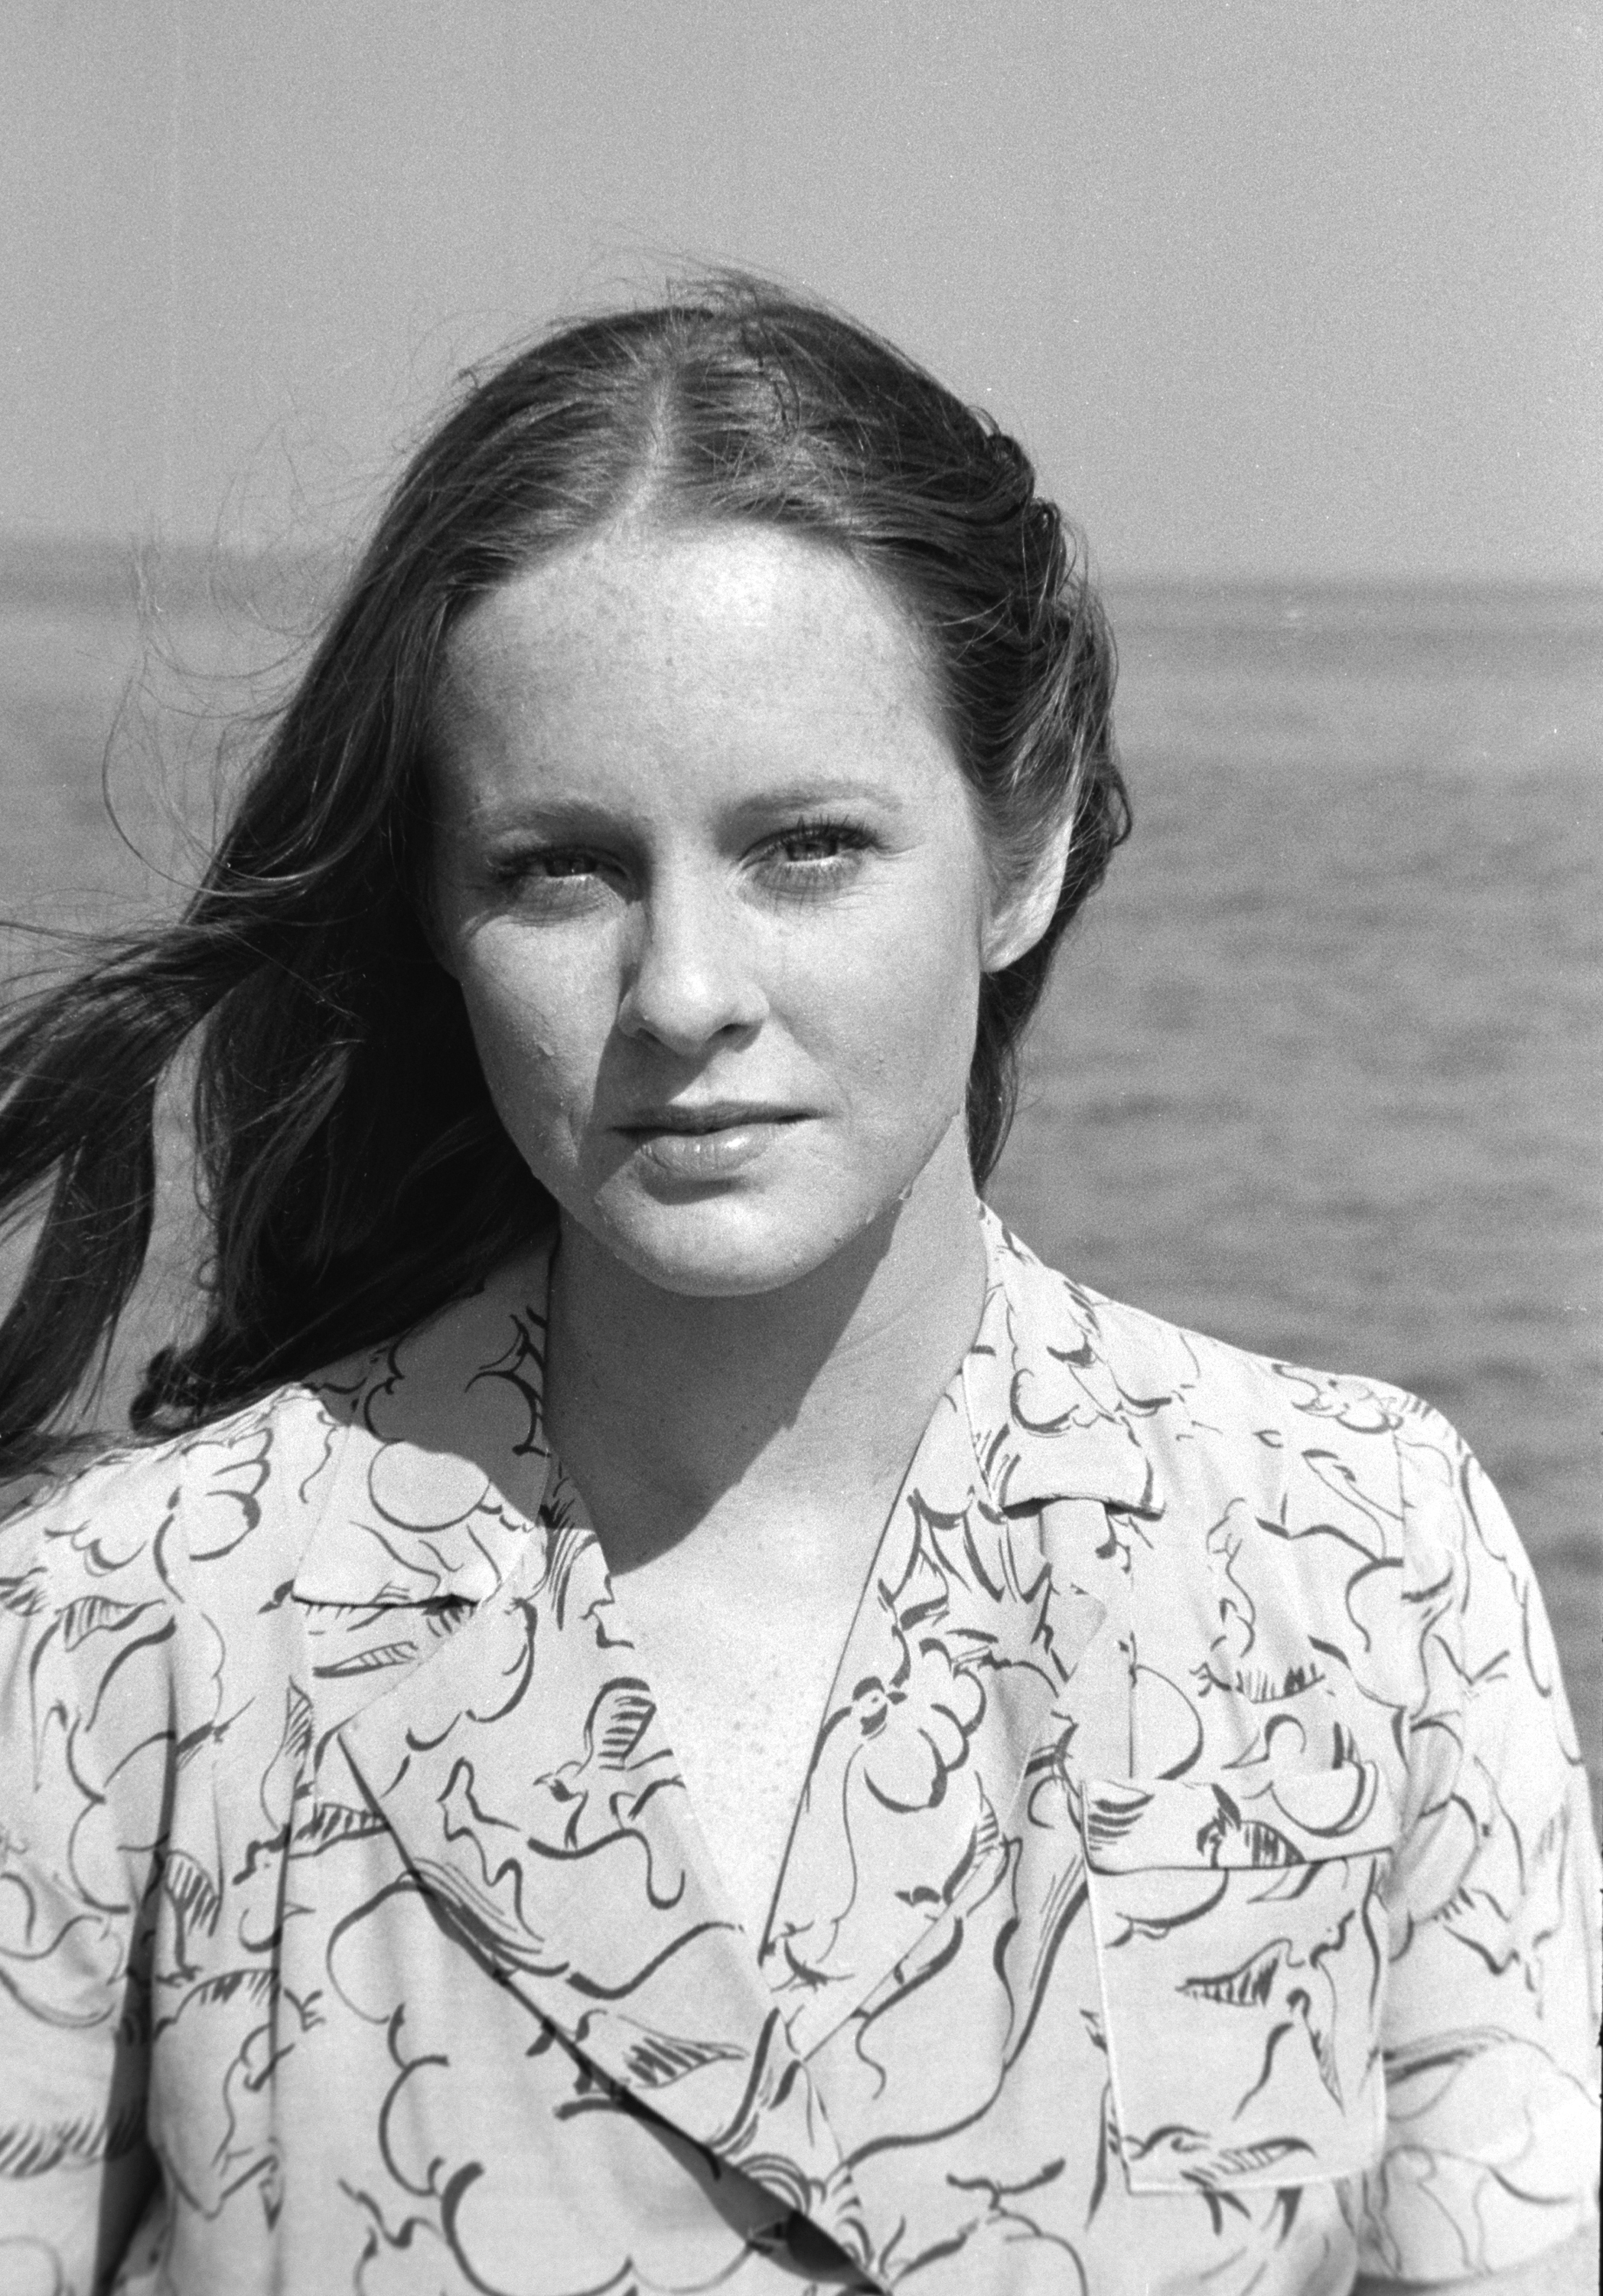 Mary McDonough on "The Waltons" in 1977 | Source: Getty Images